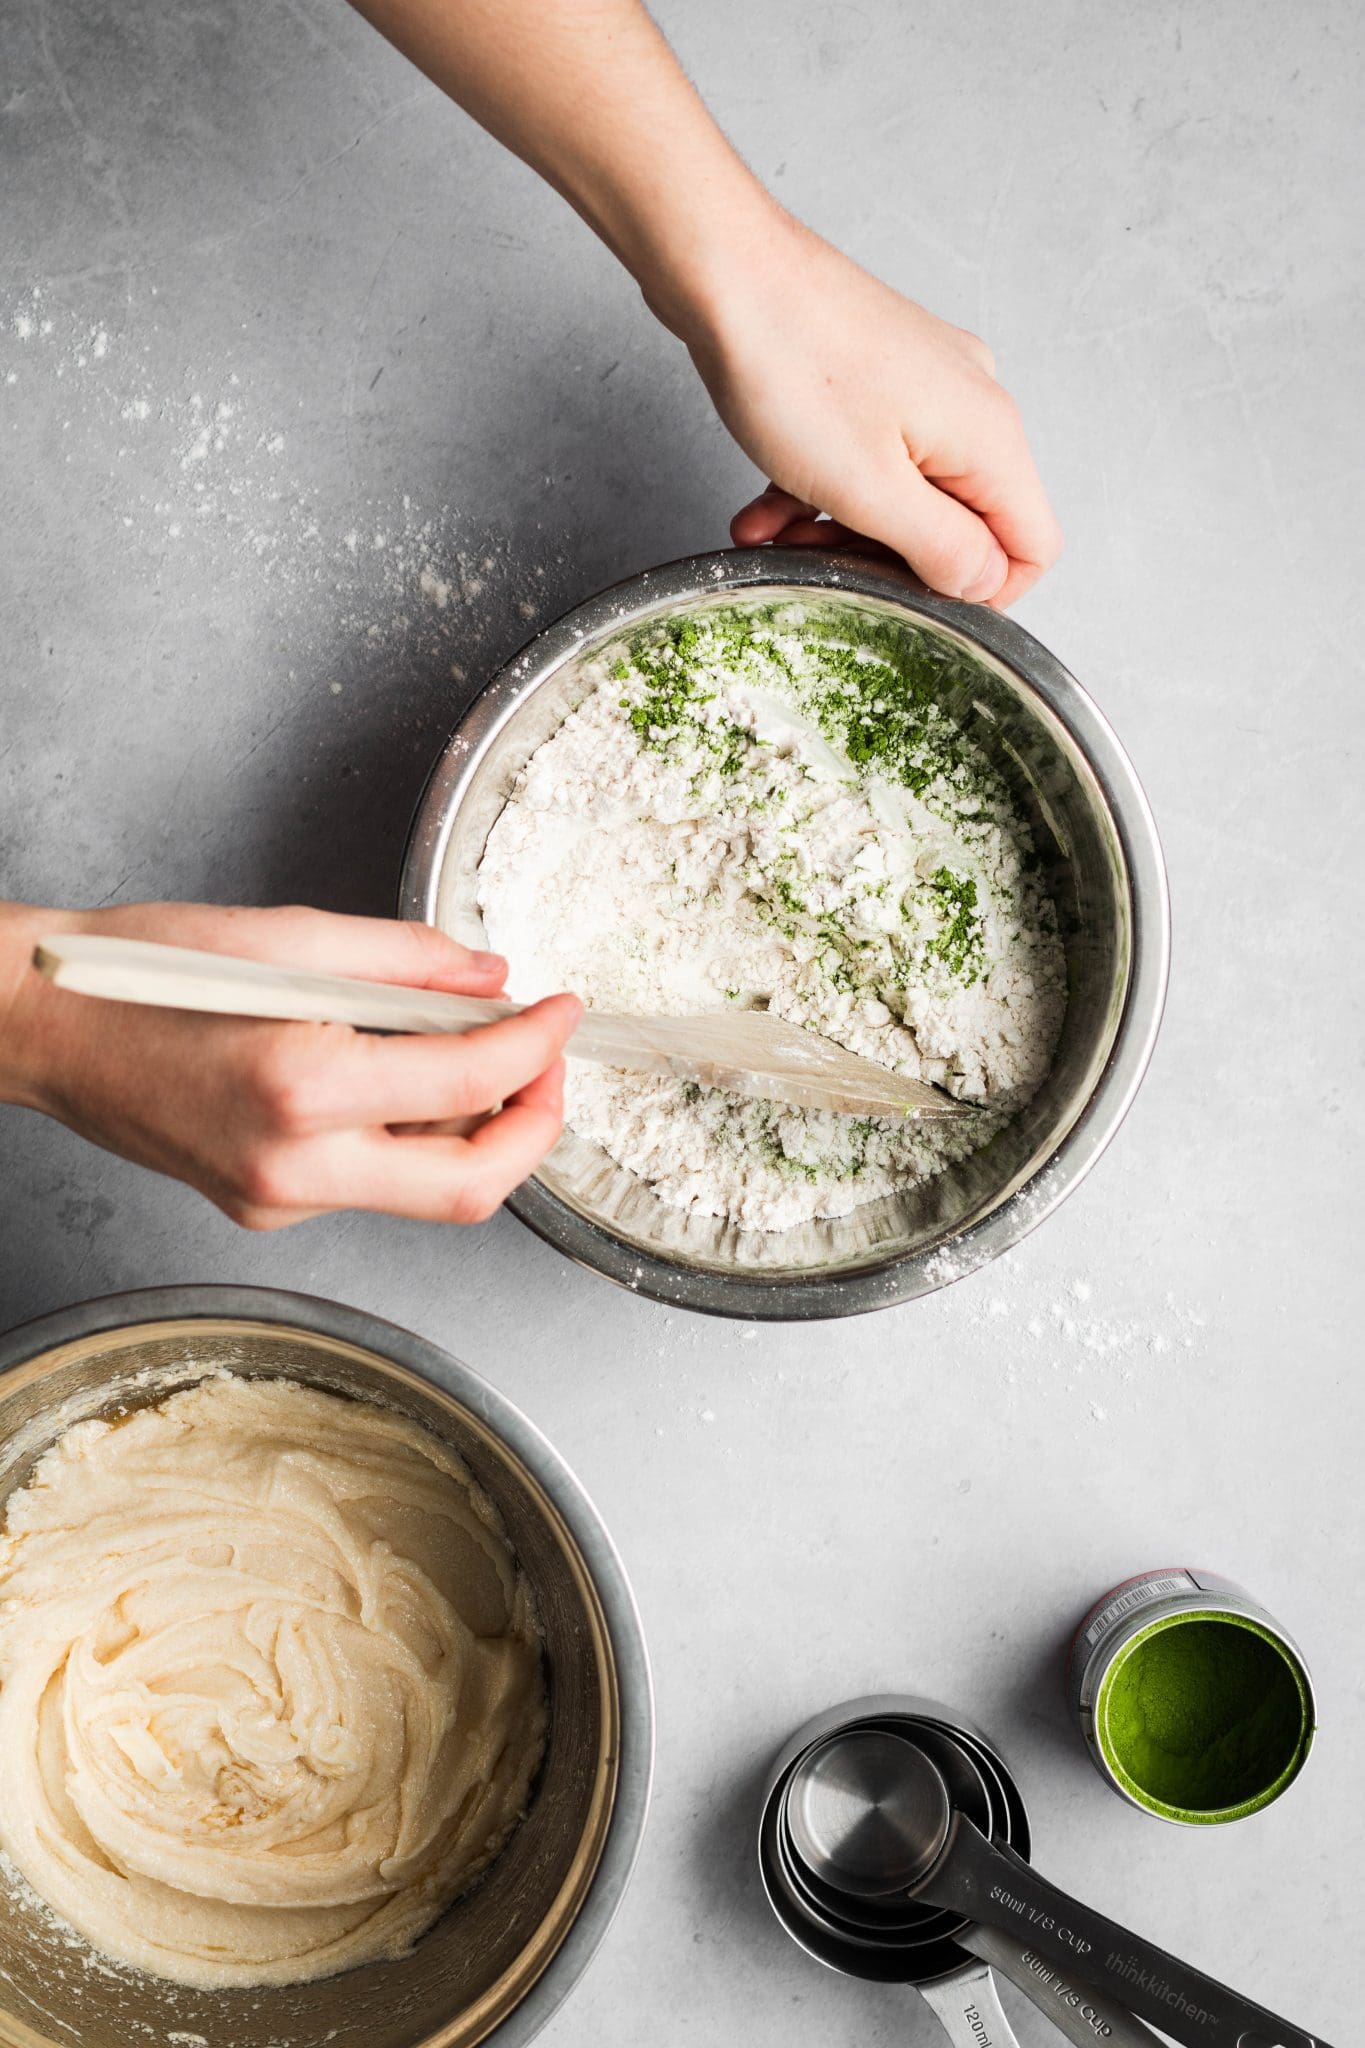 Hands mixing cookie ingredients in a bowl